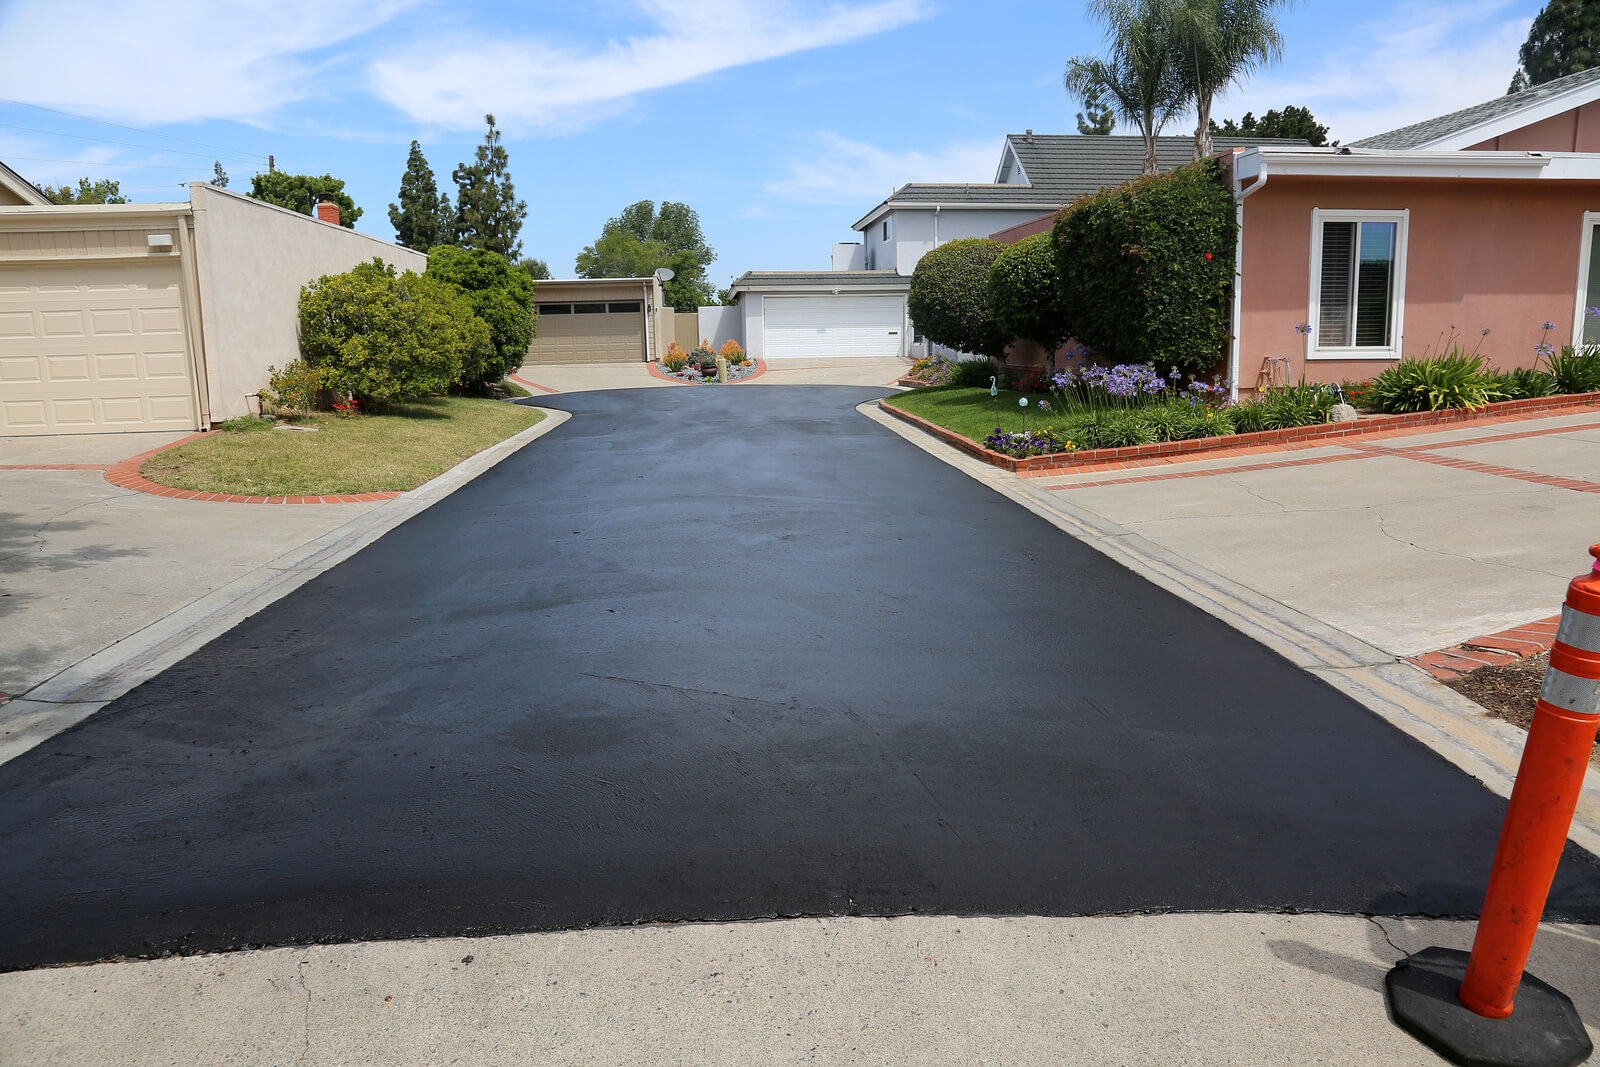 How Much Will It Cost To Resurface My Asphalt Pavement?